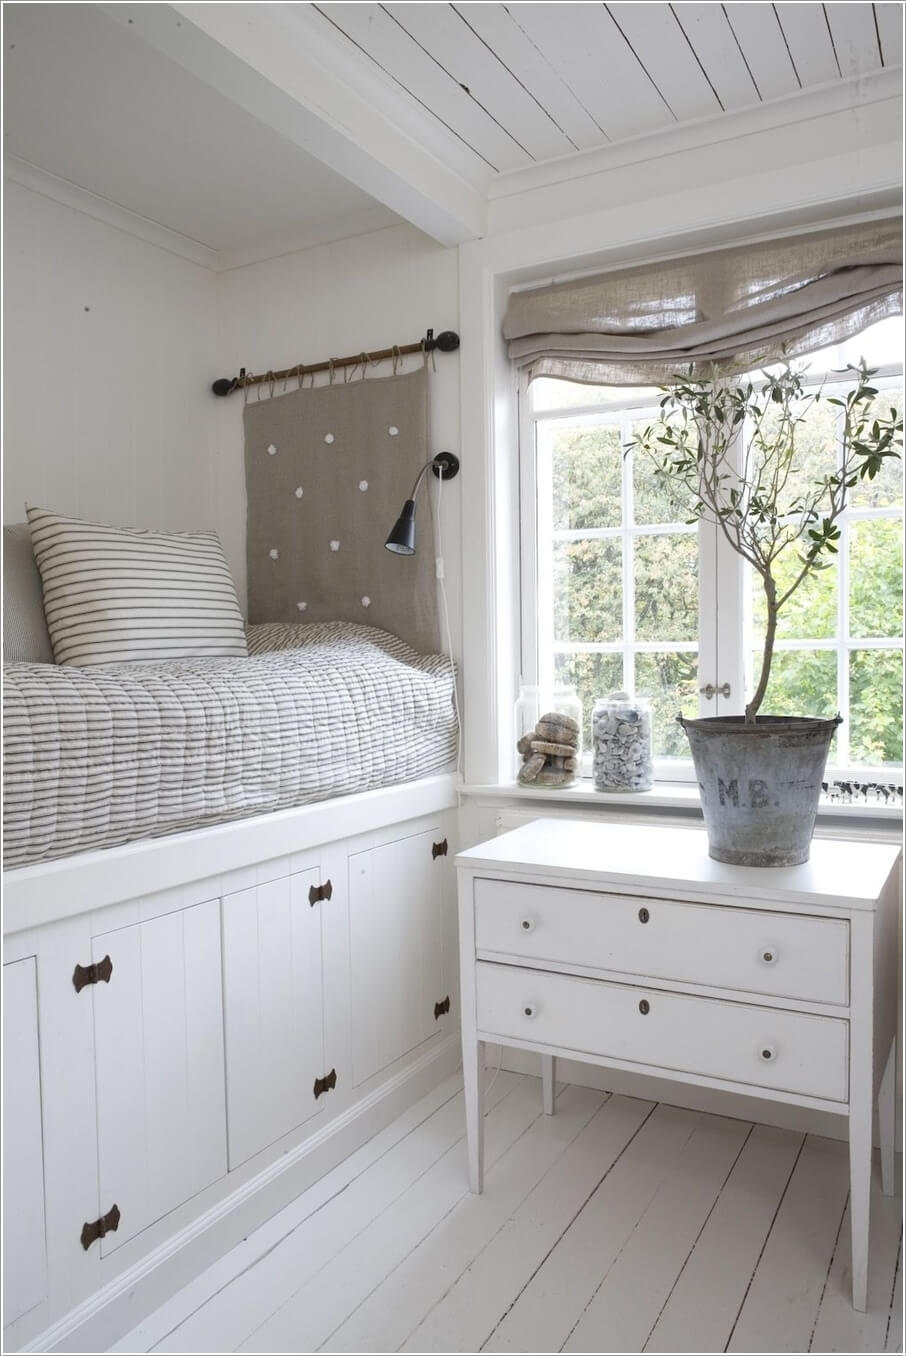 Clever Built-in Ideas for Small Rooms 